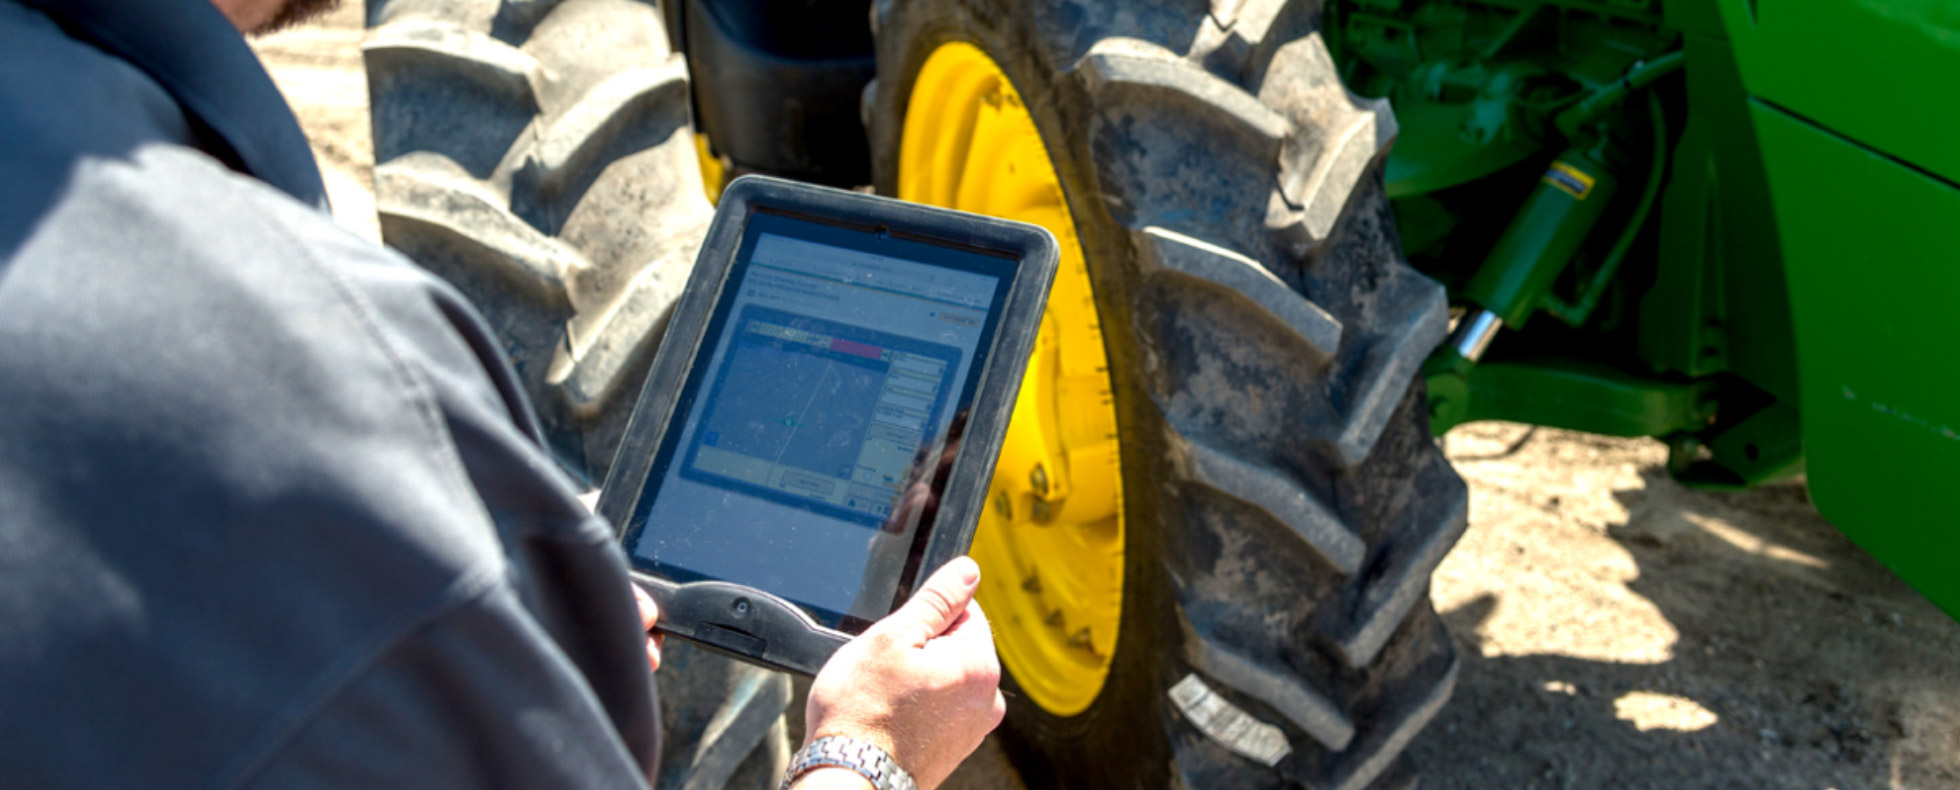 5 Steps to Evaluate Agriculture Technology Opportunities for Your Farm